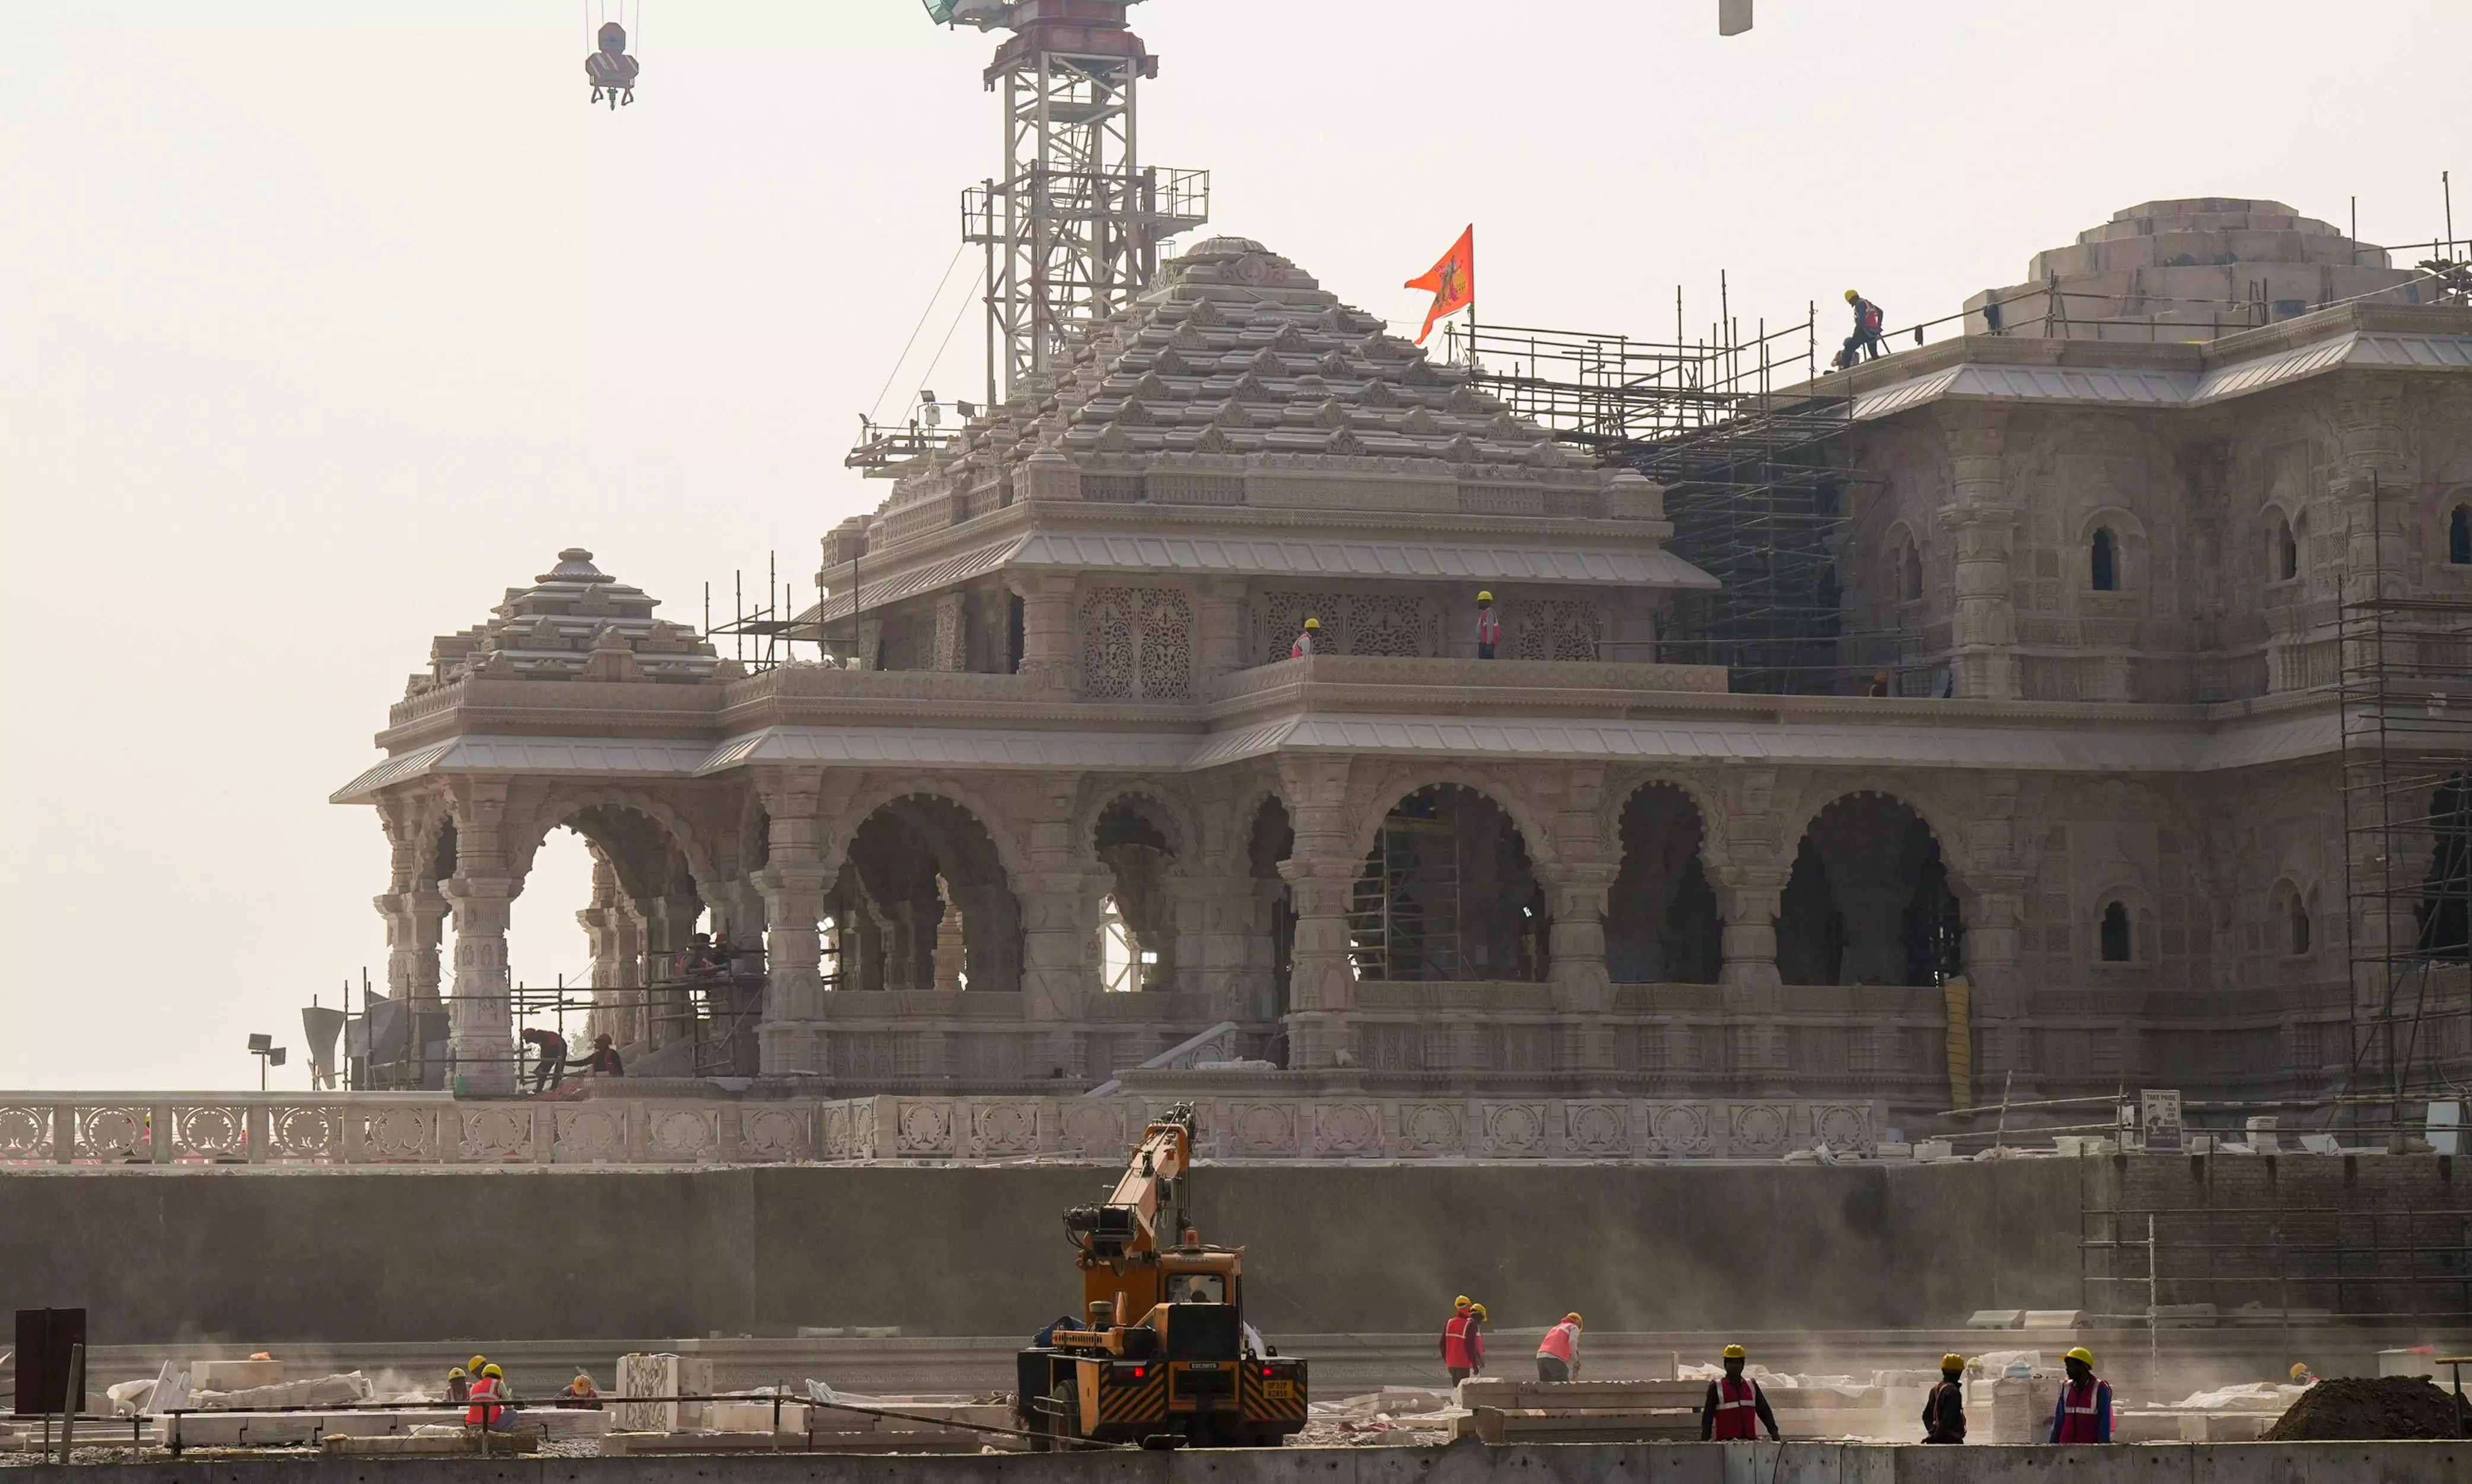 Nepals Janakpur to celebrate Ram temple consecration with multiple events